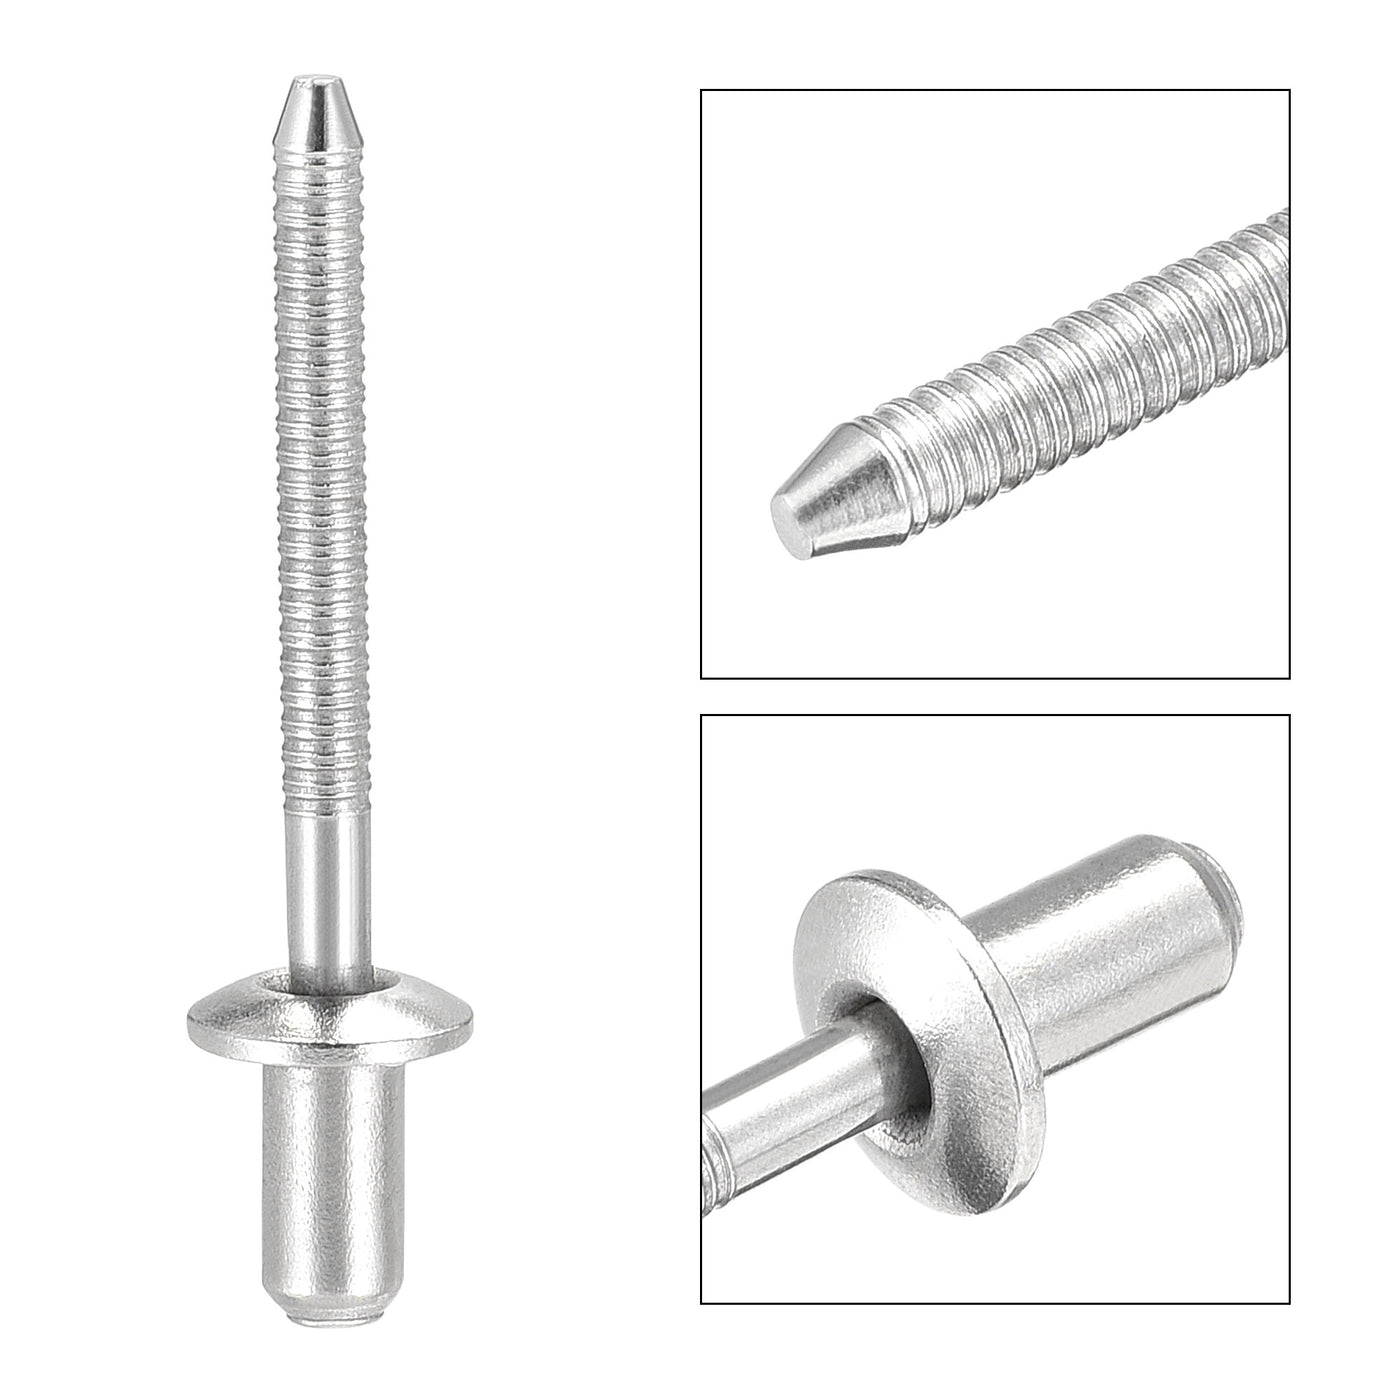 uxcell Uxcell Blind Rivets 304 Stainless Steel 4.8mm Diameter 9mm Grip Length 50pcs